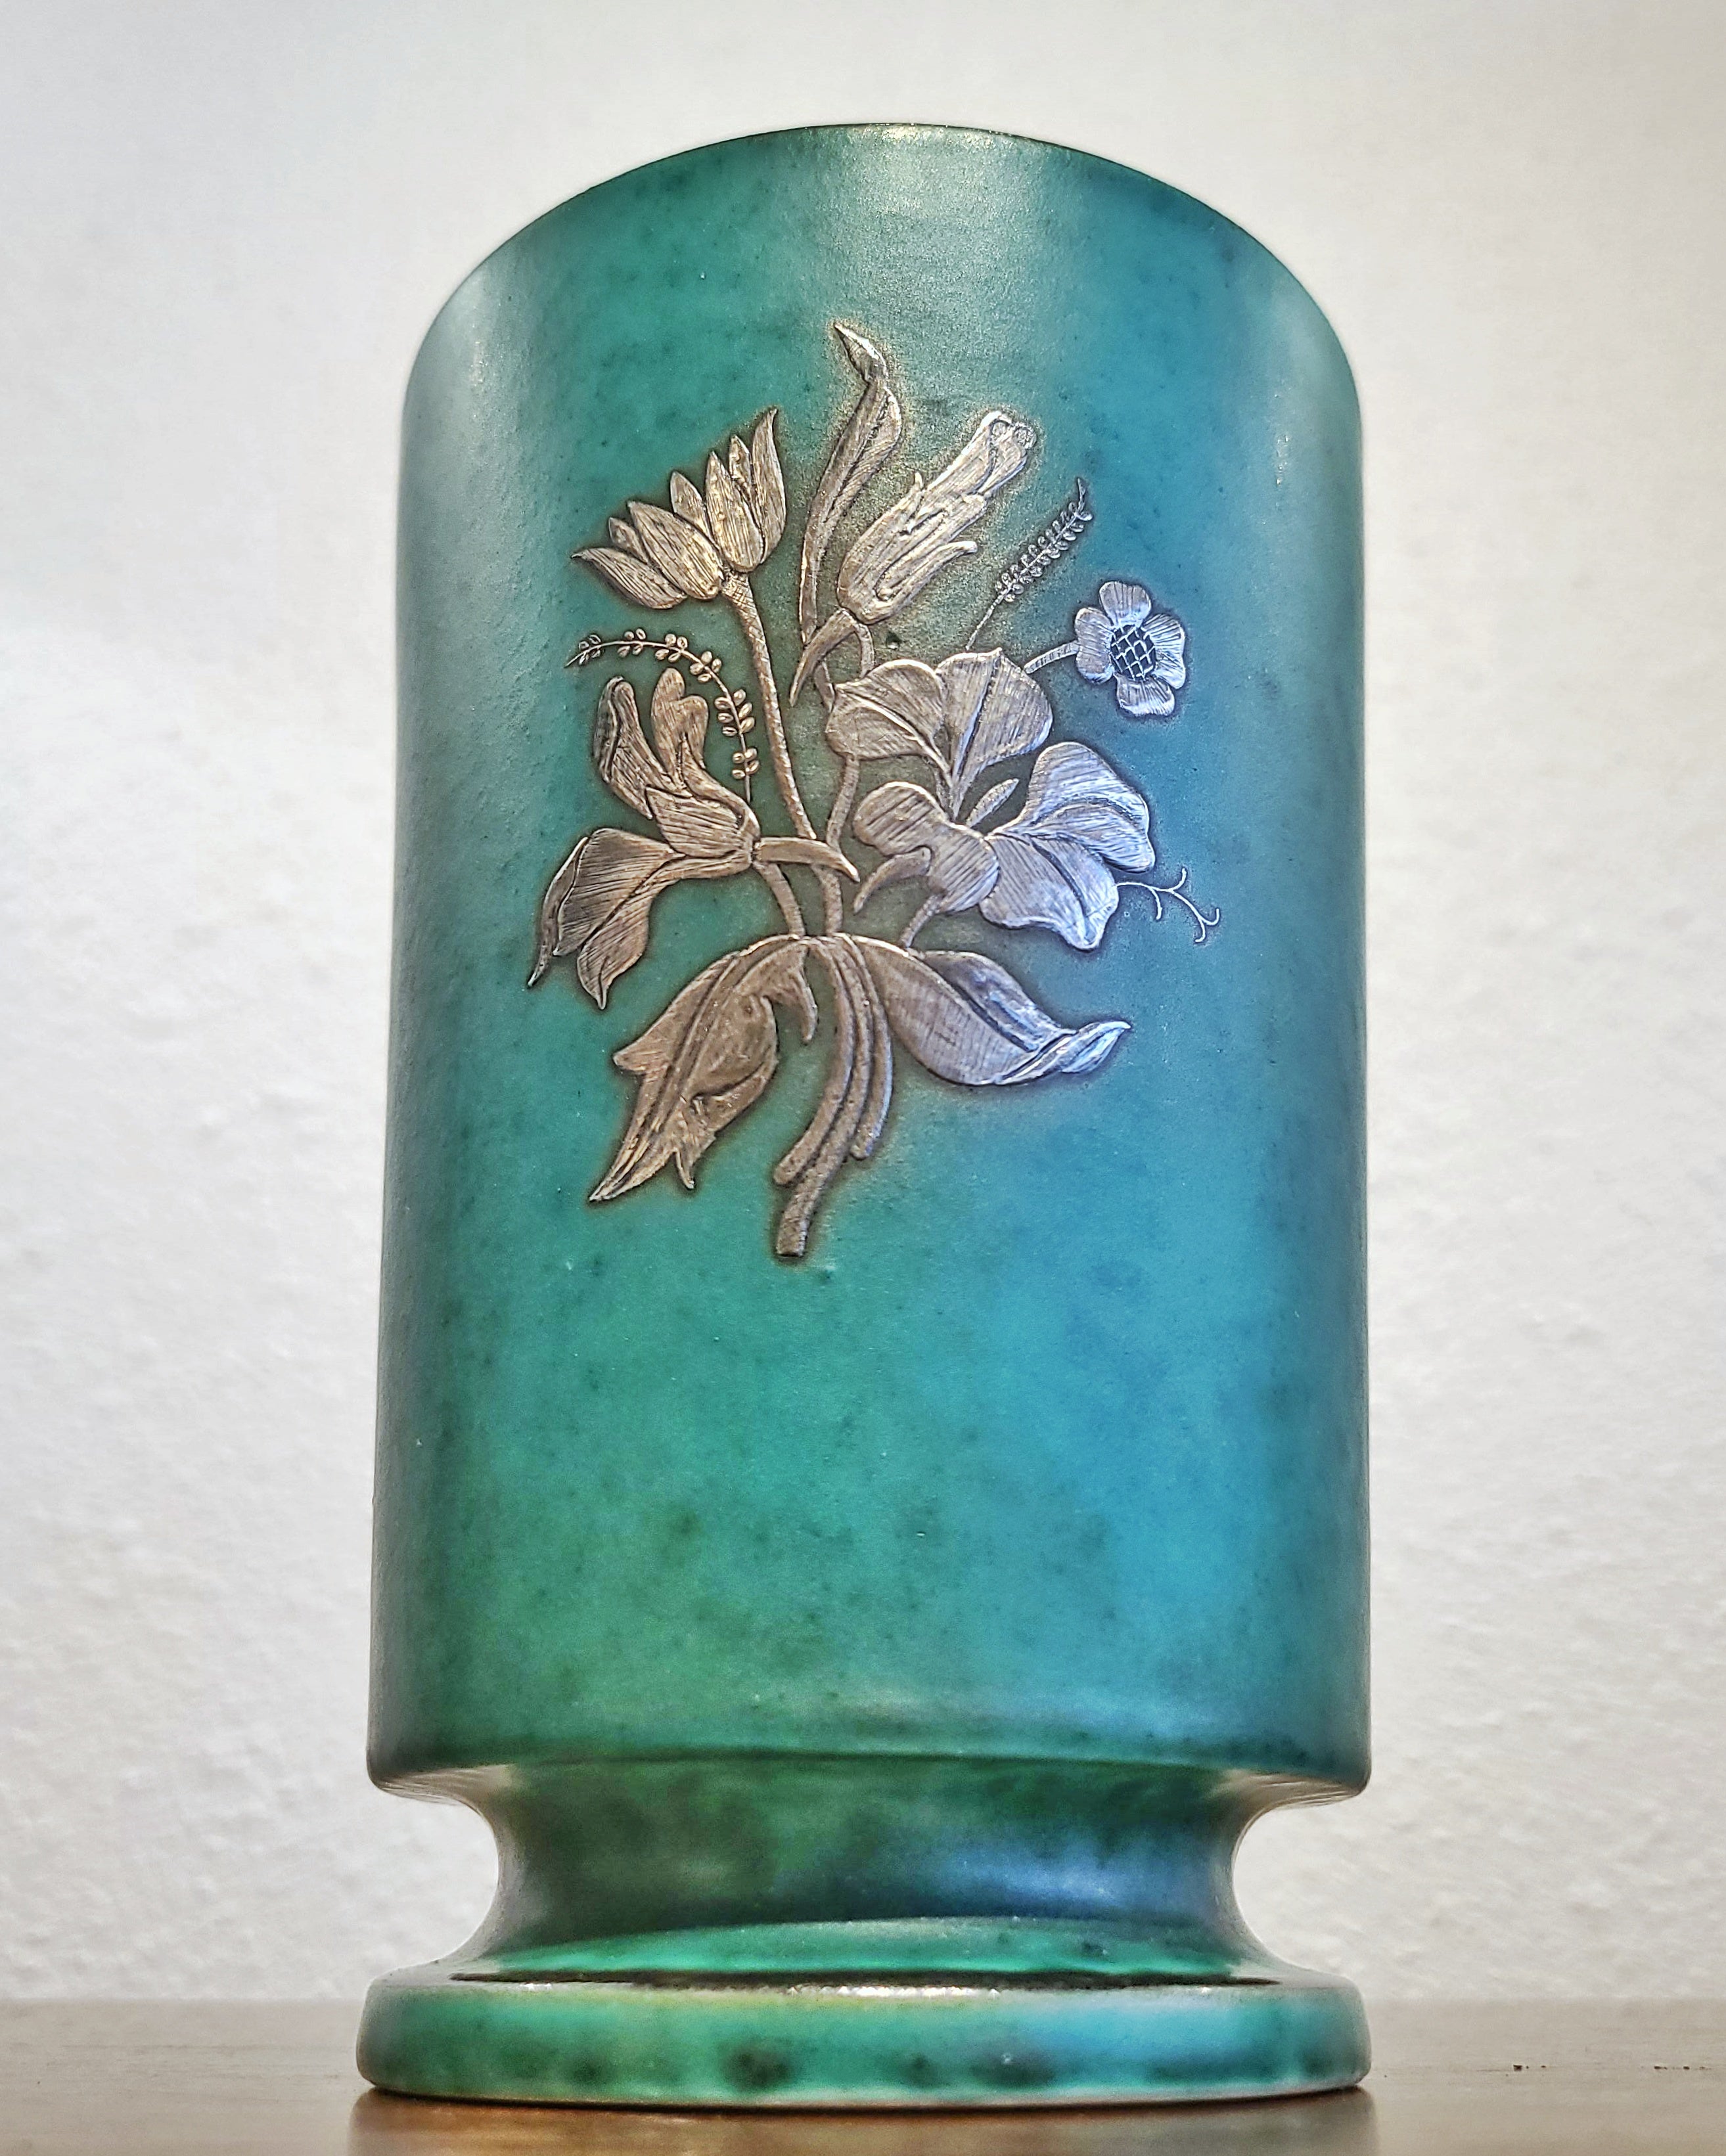 FOOTED ‘ARGENTA’ VASE WITH SILVER OVERLAY BY WILHELM KÅGE FOR GUSTAVSBERG